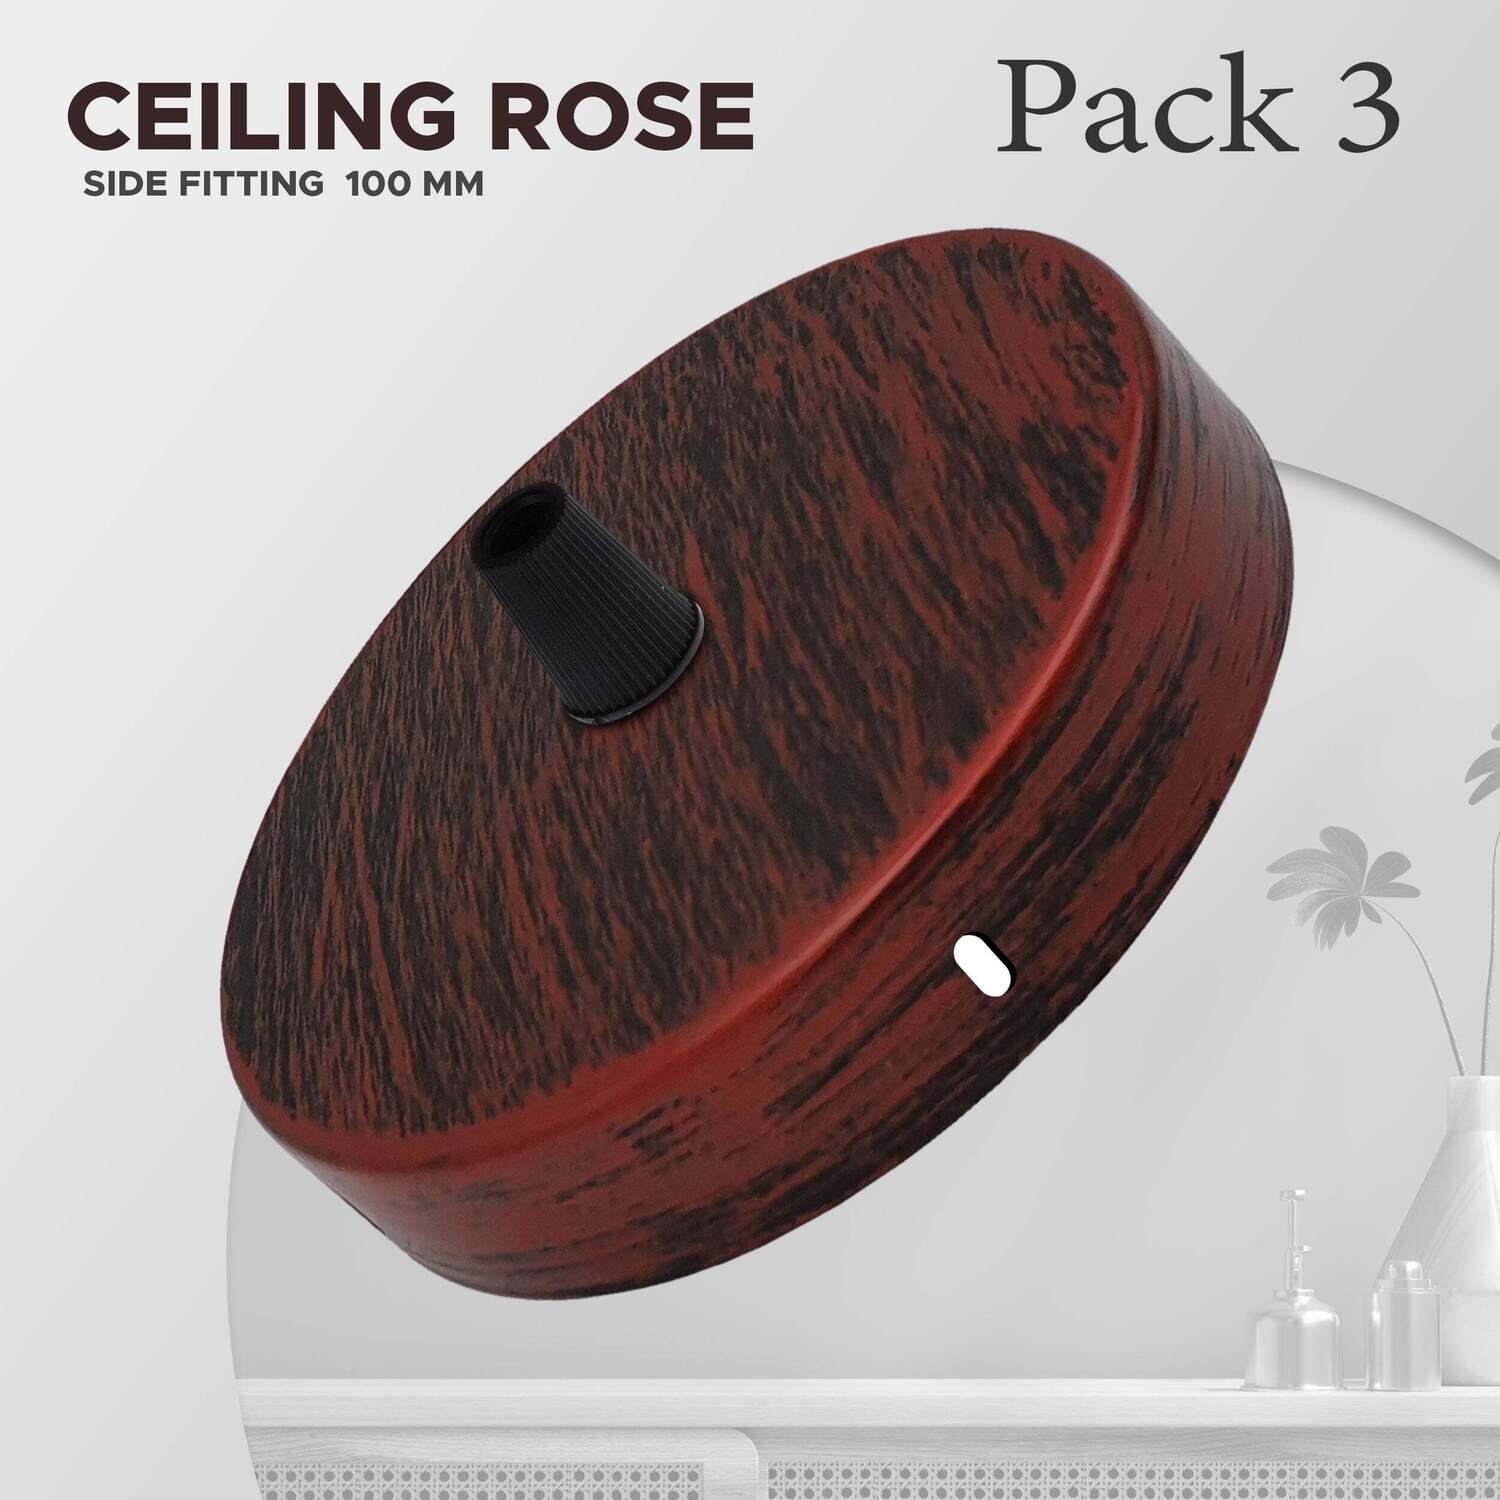 Rustic Red Ceiling Rose Pendant Light fitting Pack 3